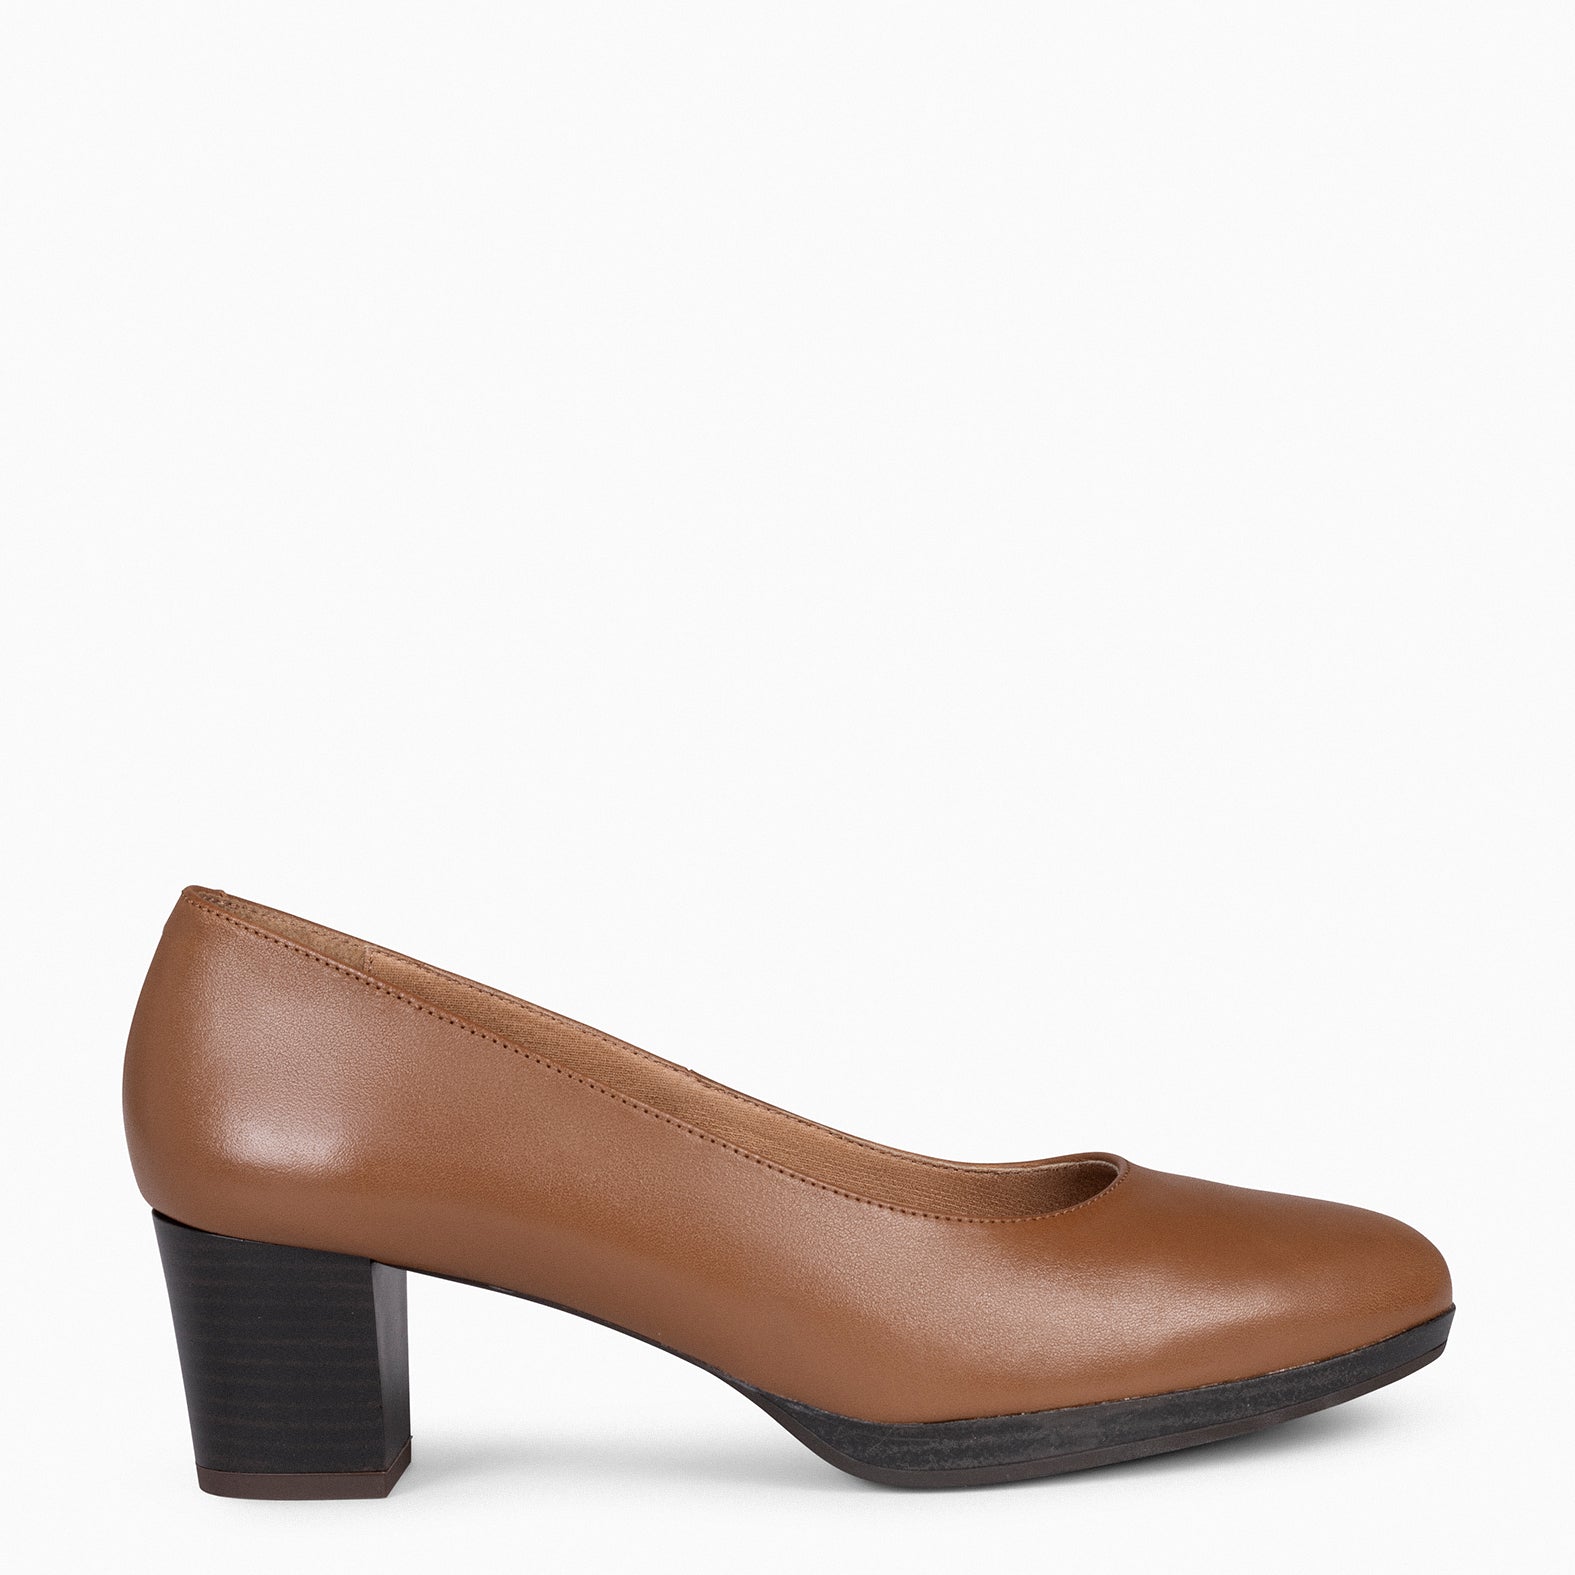 FLIGHT S - BROWN shoes with heel and platform 